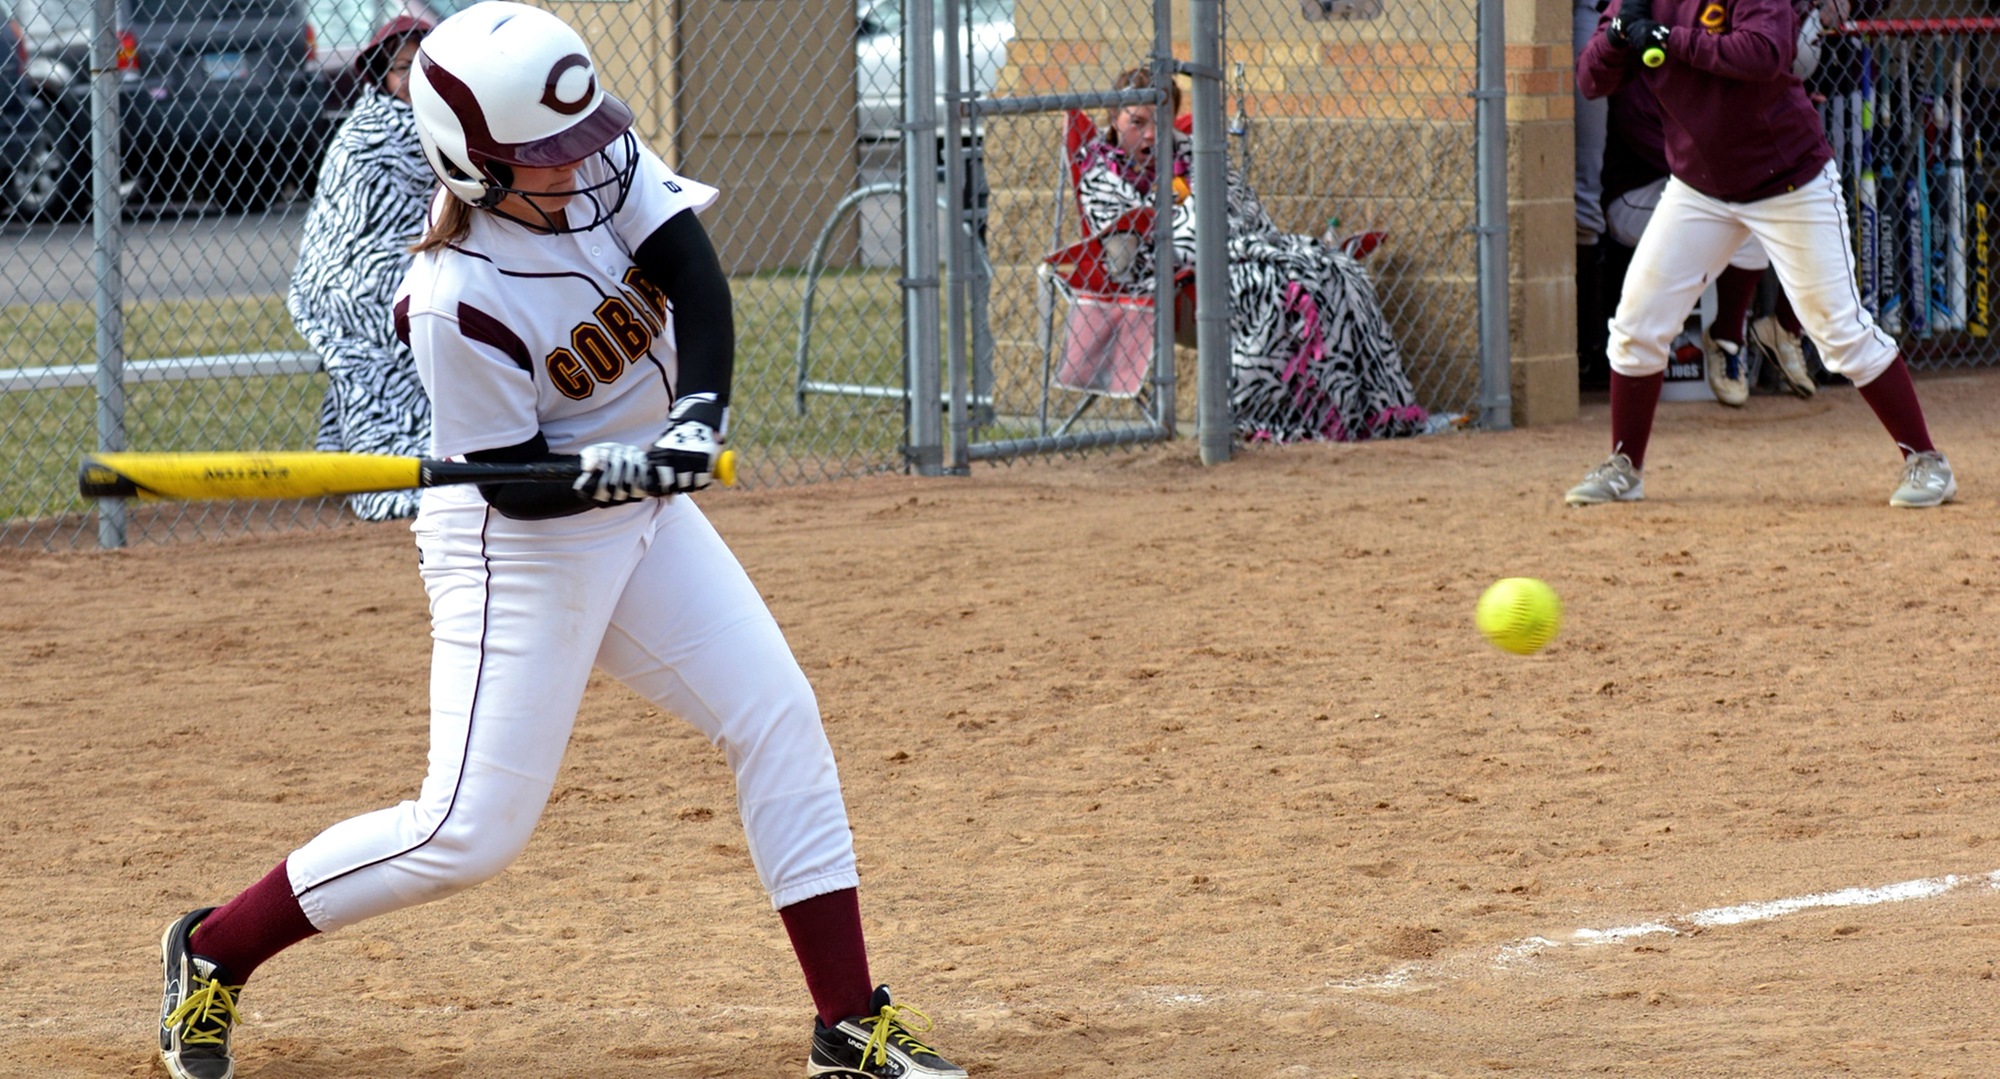 Sophomore Nicole Johannes had hits in both games and helped the Cobbers post wins over Finlandia and Northland.